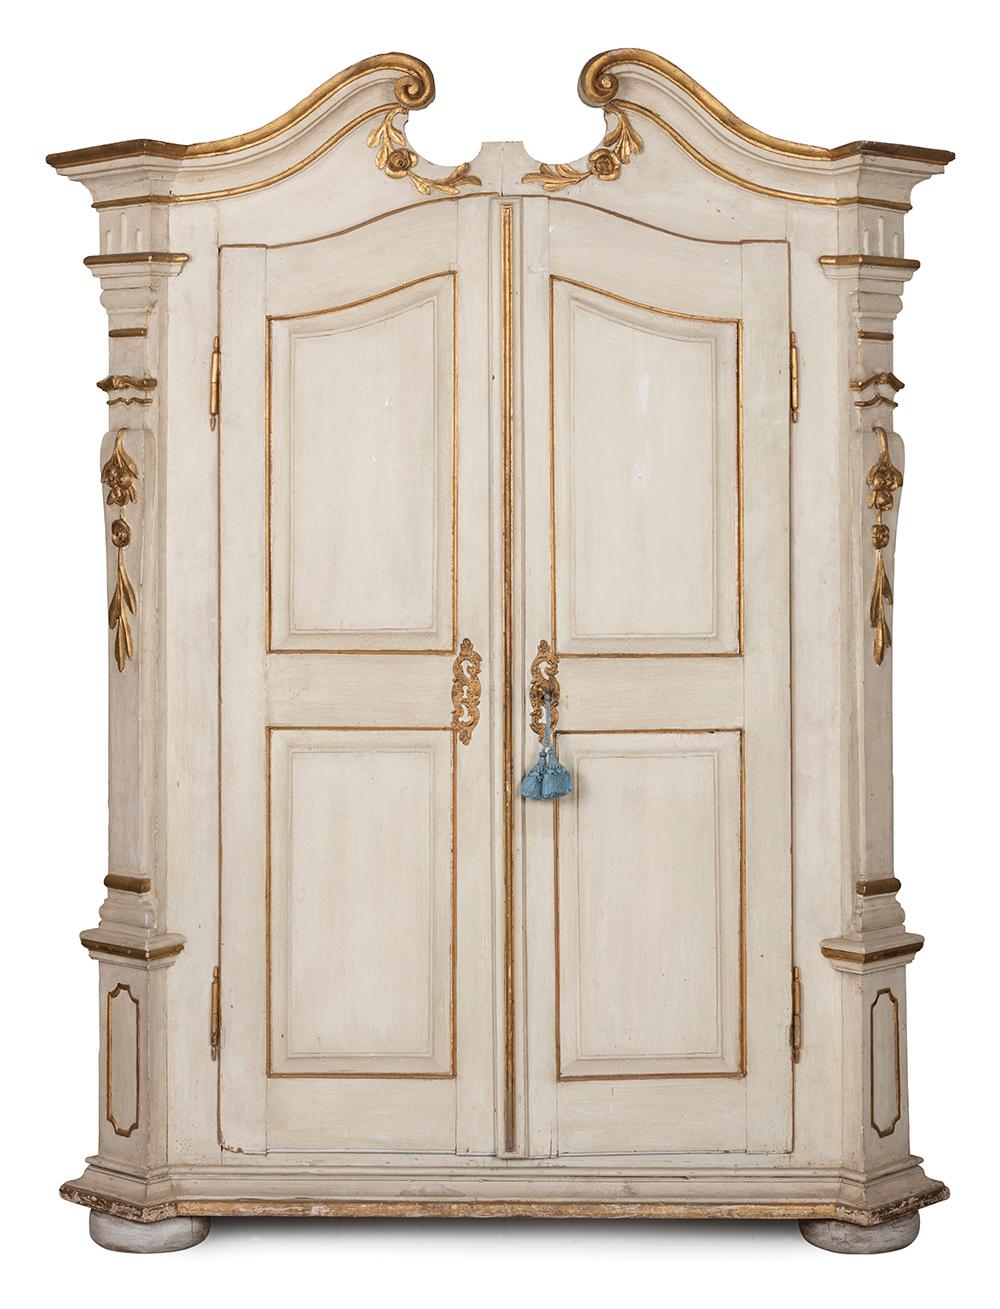 AN IMPRESSIVE ITALIAN WHITE AND GILT PAINTED CUPBOARD, PROBABLY TUSCAN 18TH CENTURY